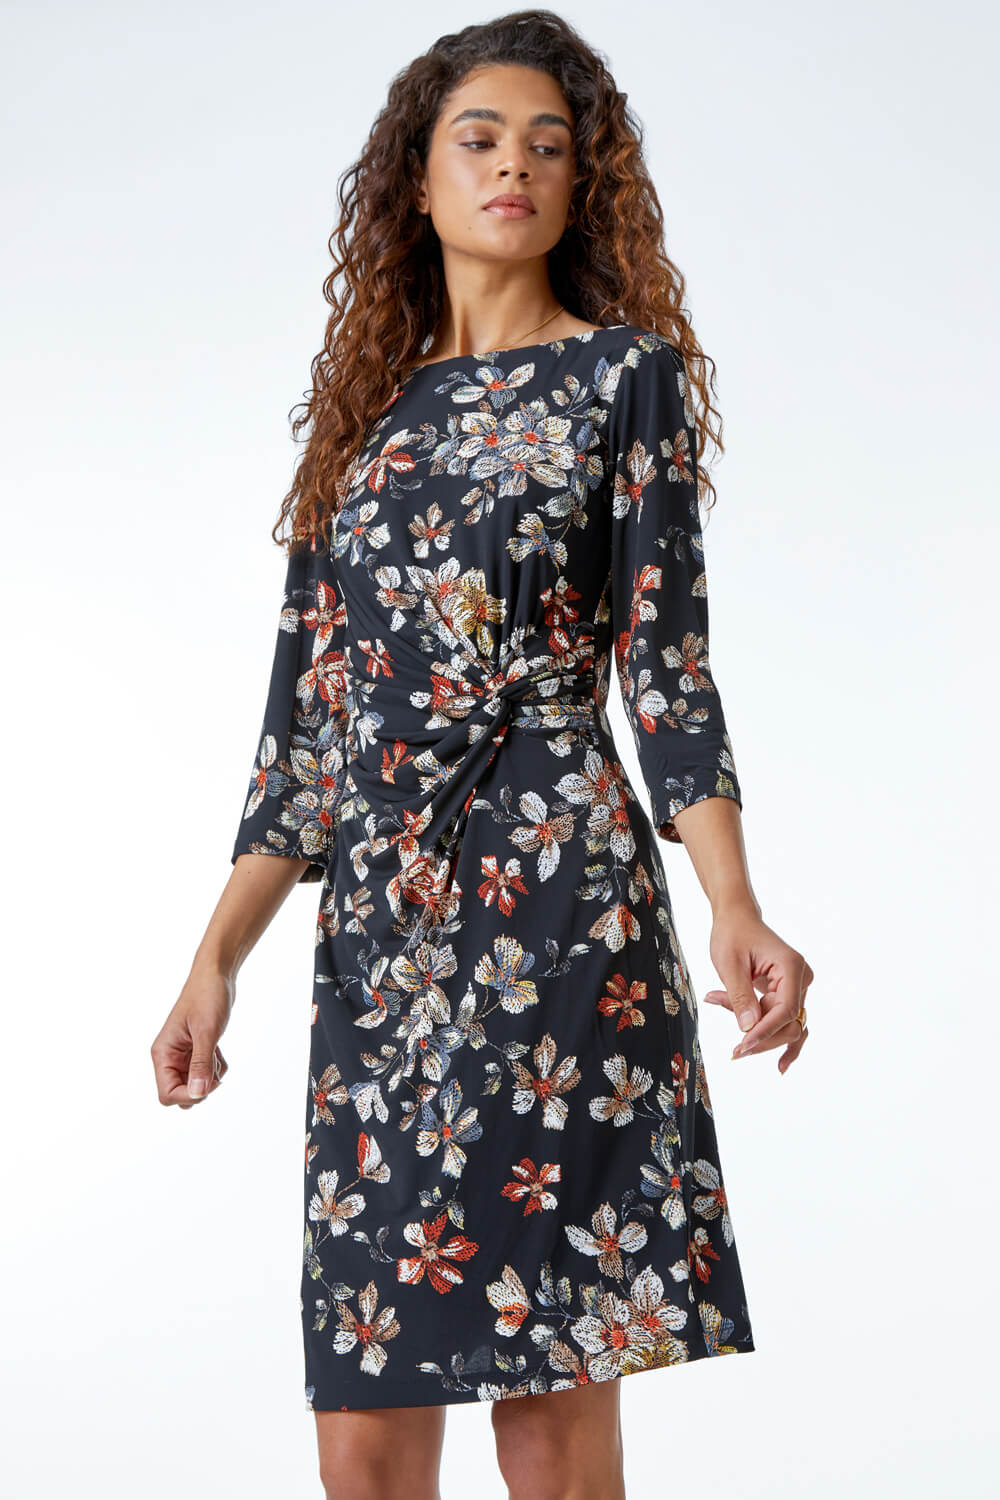 Black Textured Floral Print Ruched Waist Dress, Image 3 of 5